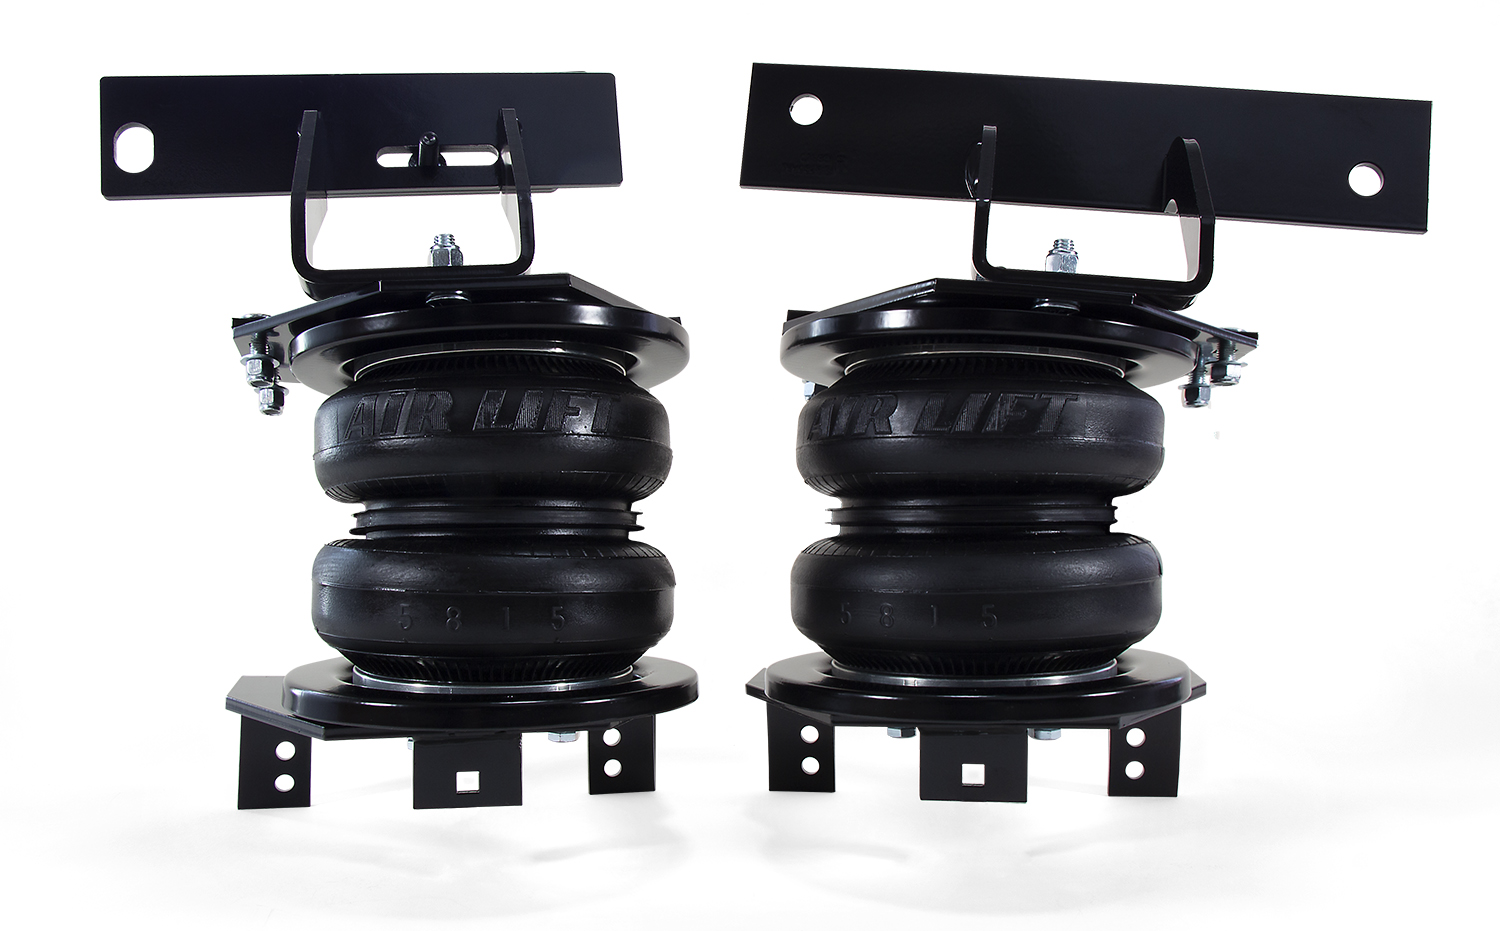 Air Lift LoadLifter 7500 XL Ultimate provides supreme support for heavy hauling Suspension Leveling Kit 57577